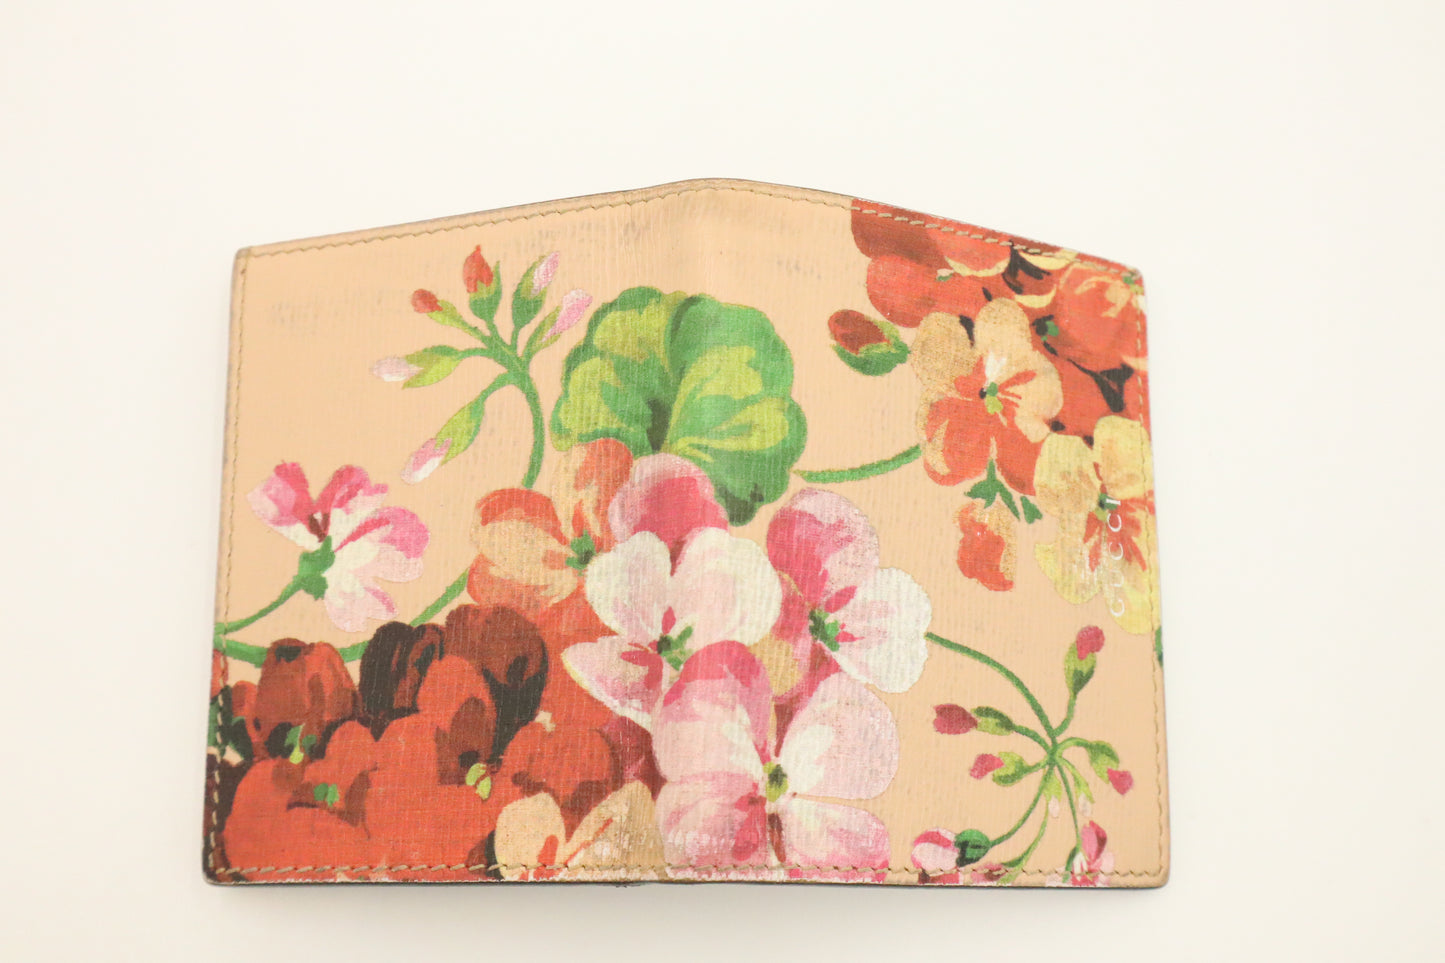 Gucci French Flap Wallet in Beige Blooms Print